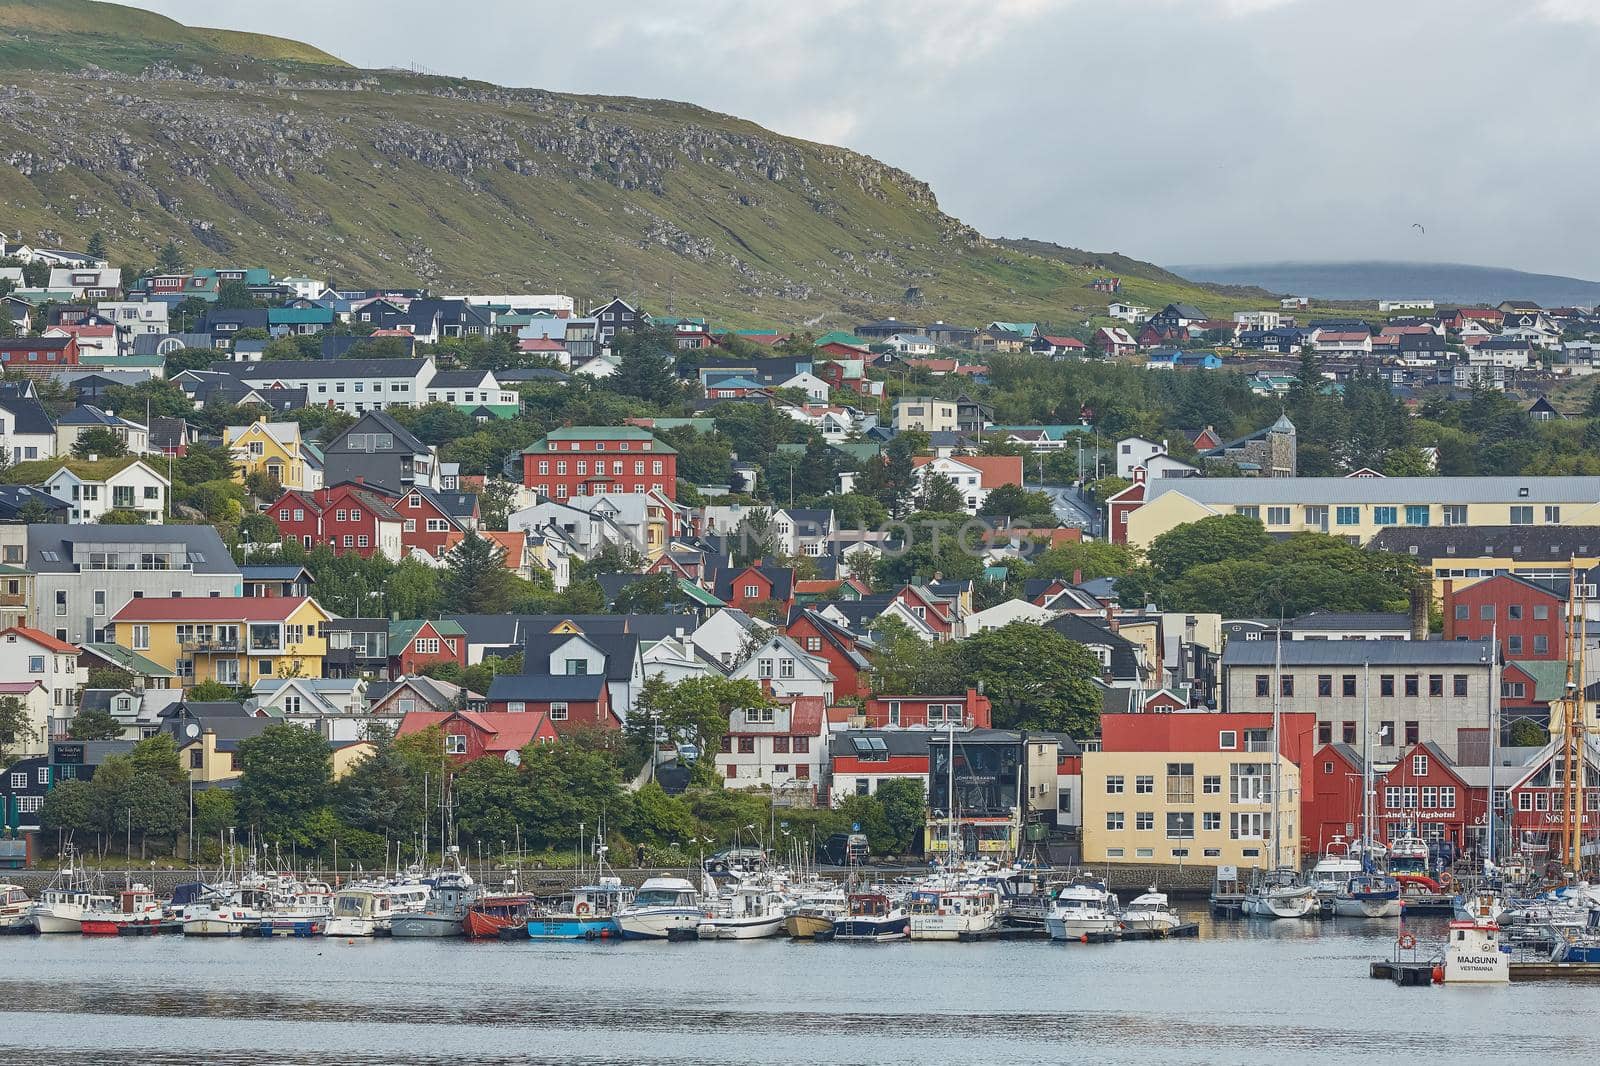 Torshawn, Capital of Faroe Islands with its downtown area and port in bay by wondry